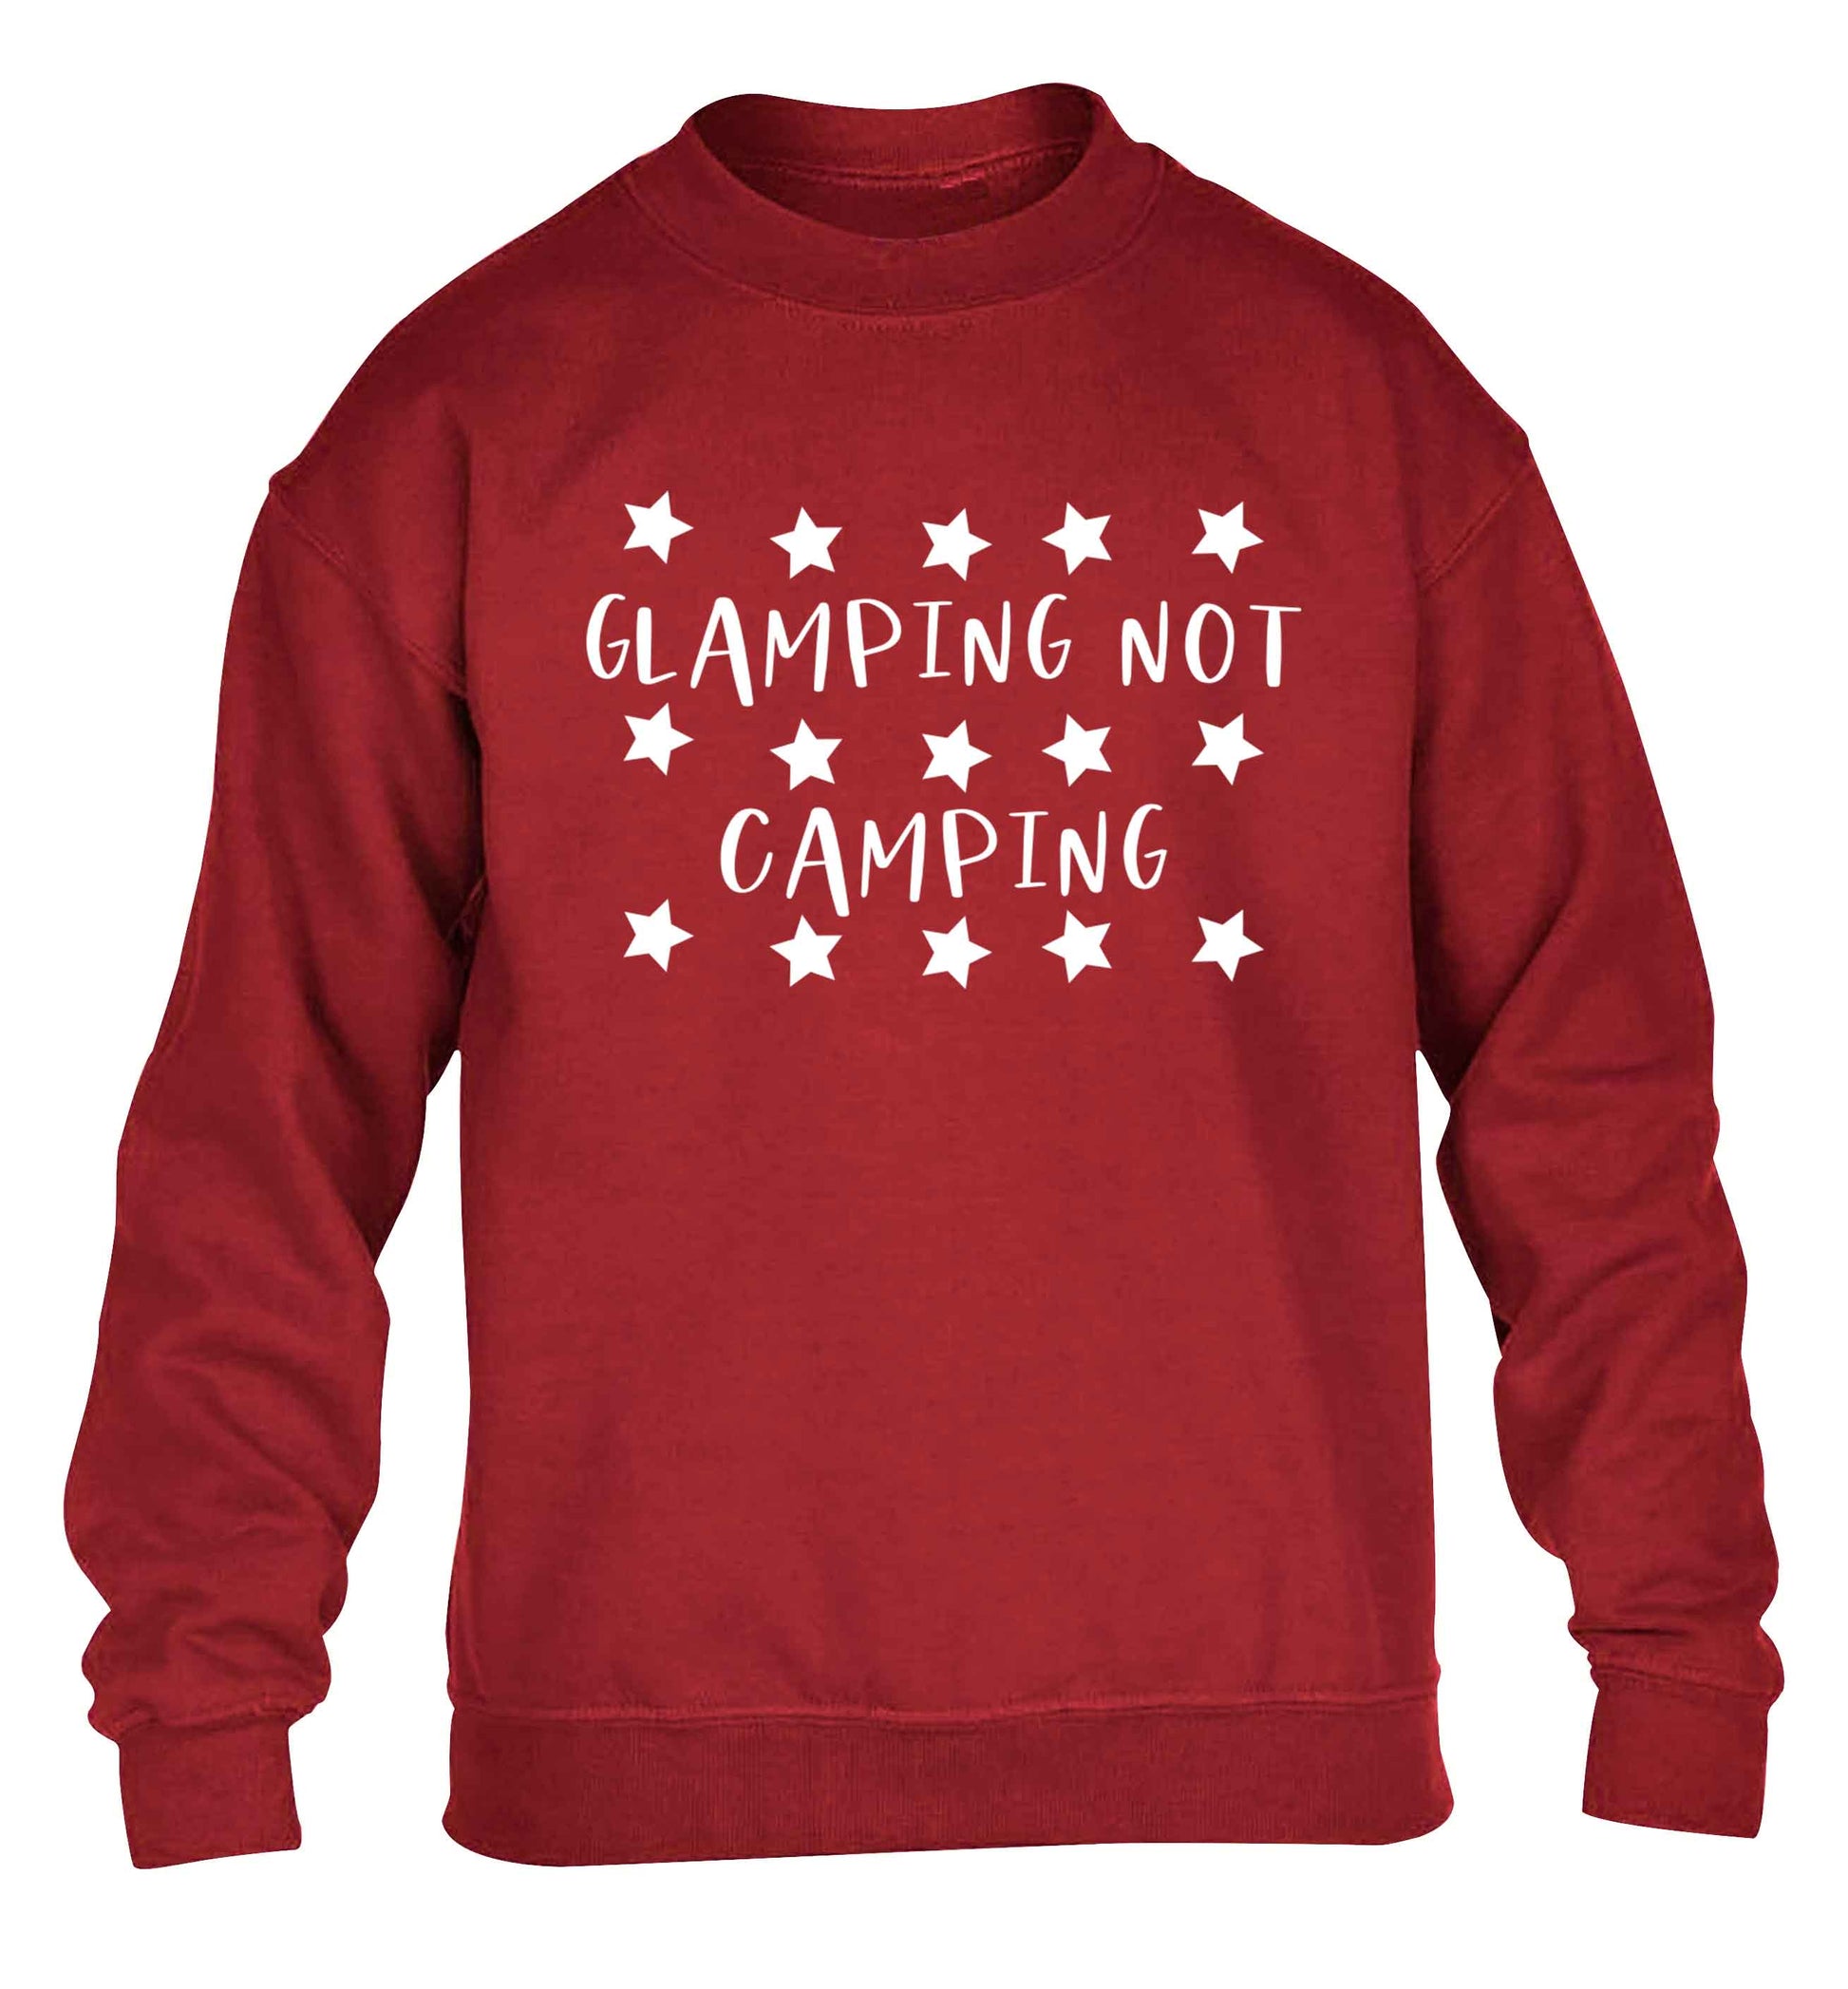 Glamping not camping children's grey sweater 12-13 Years